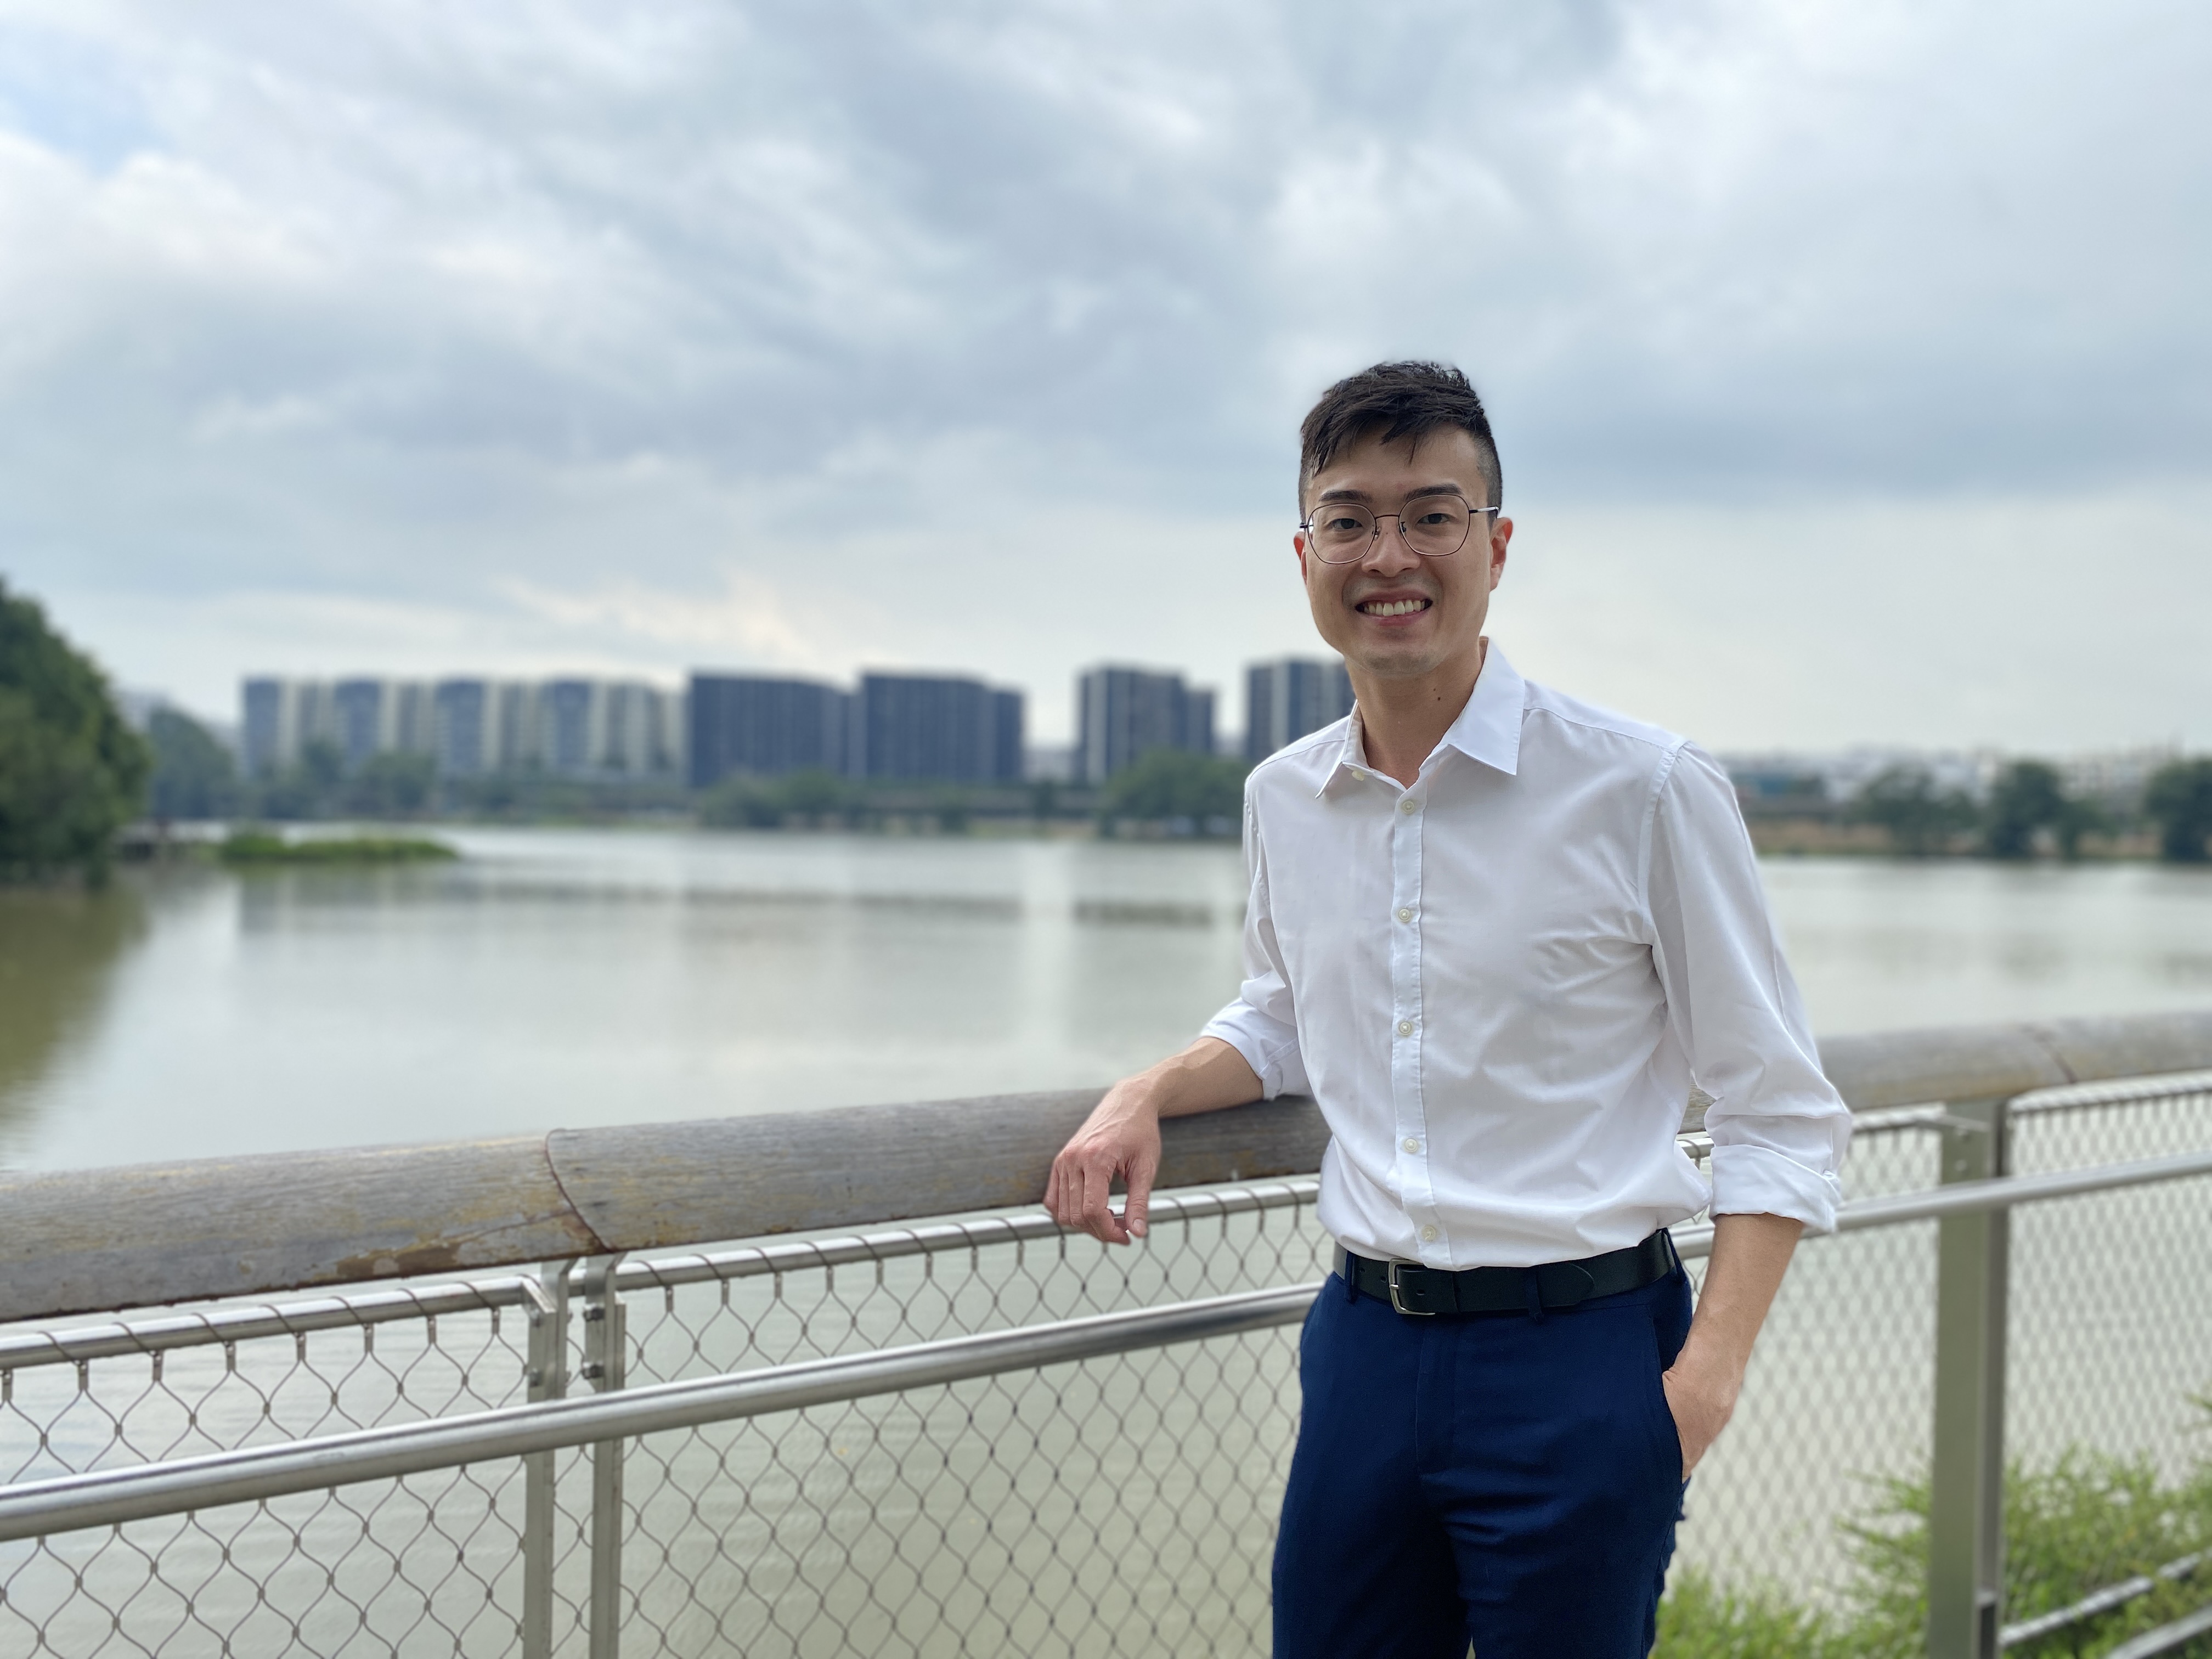 Mr Vincent Cai had completed his Masters in Public Health while working as part of the contact-tracing task group tackling the Covid-19 pandemic here.